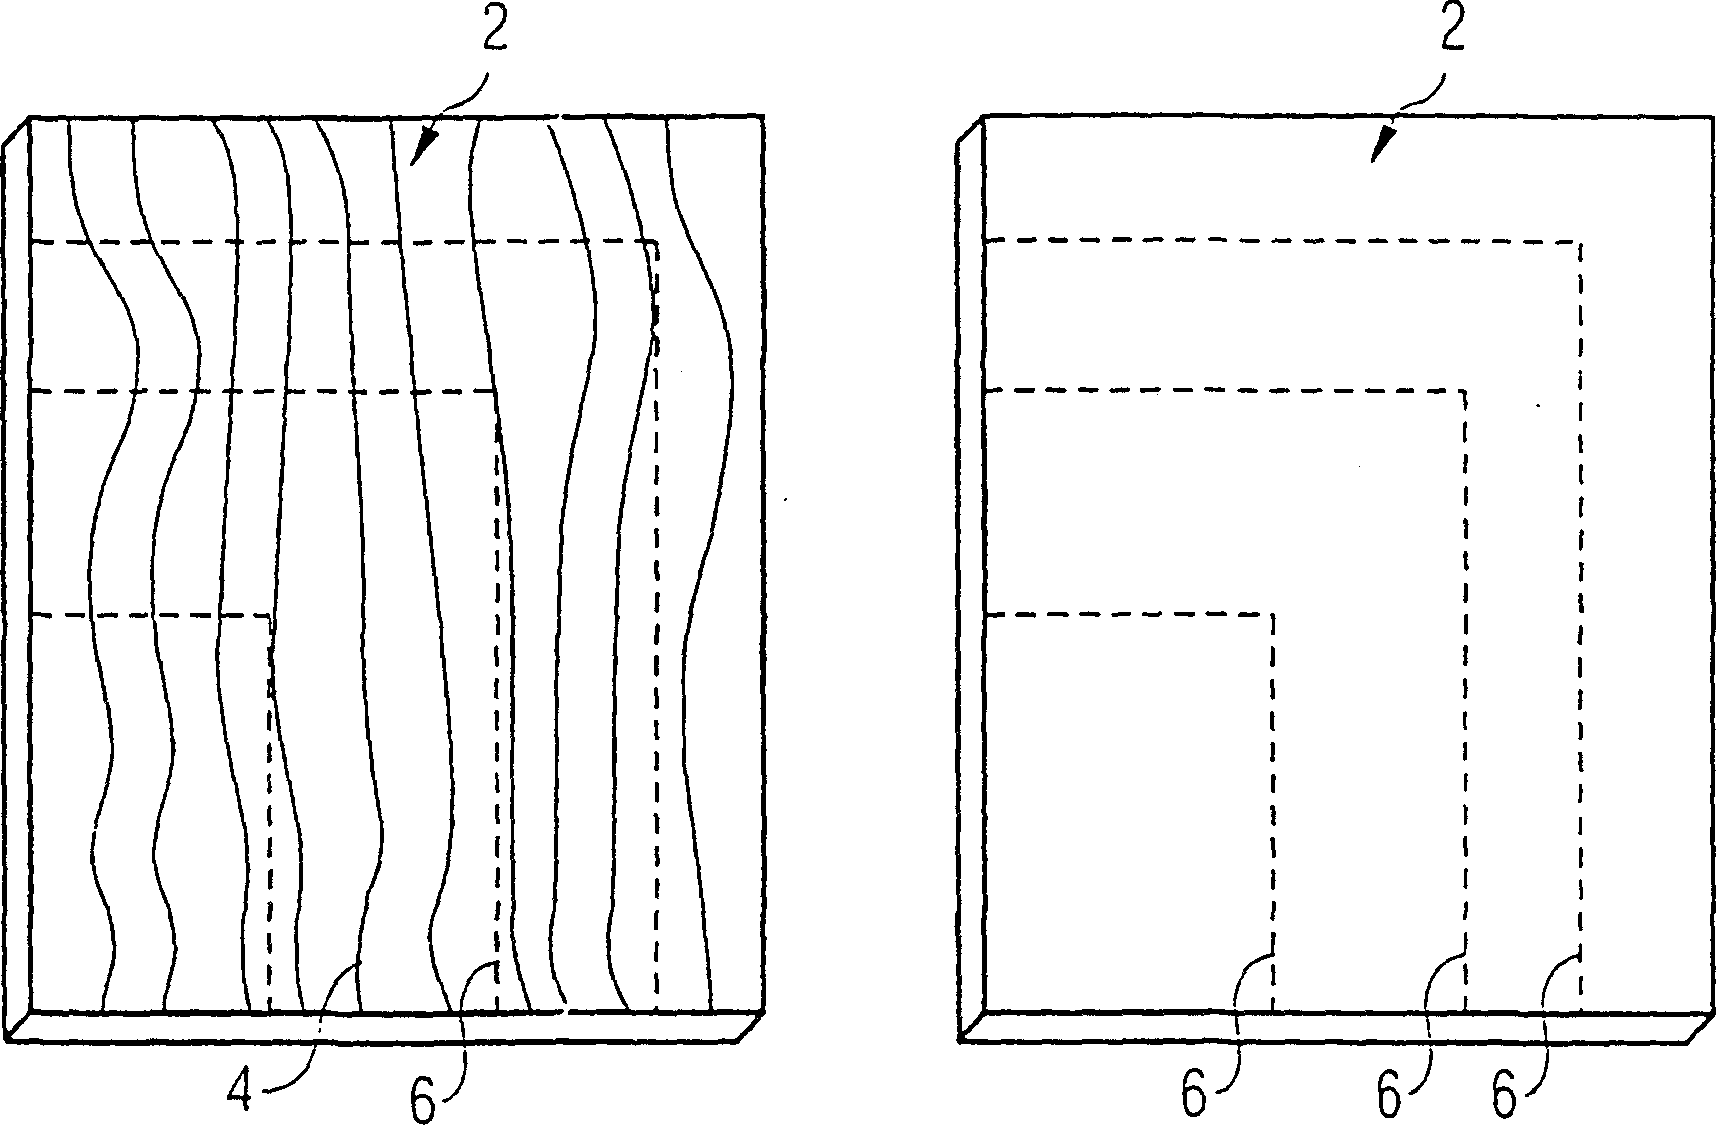 Method and system and device for producing components with pre-determained surface appearance, in particular for front panels of kitchen units